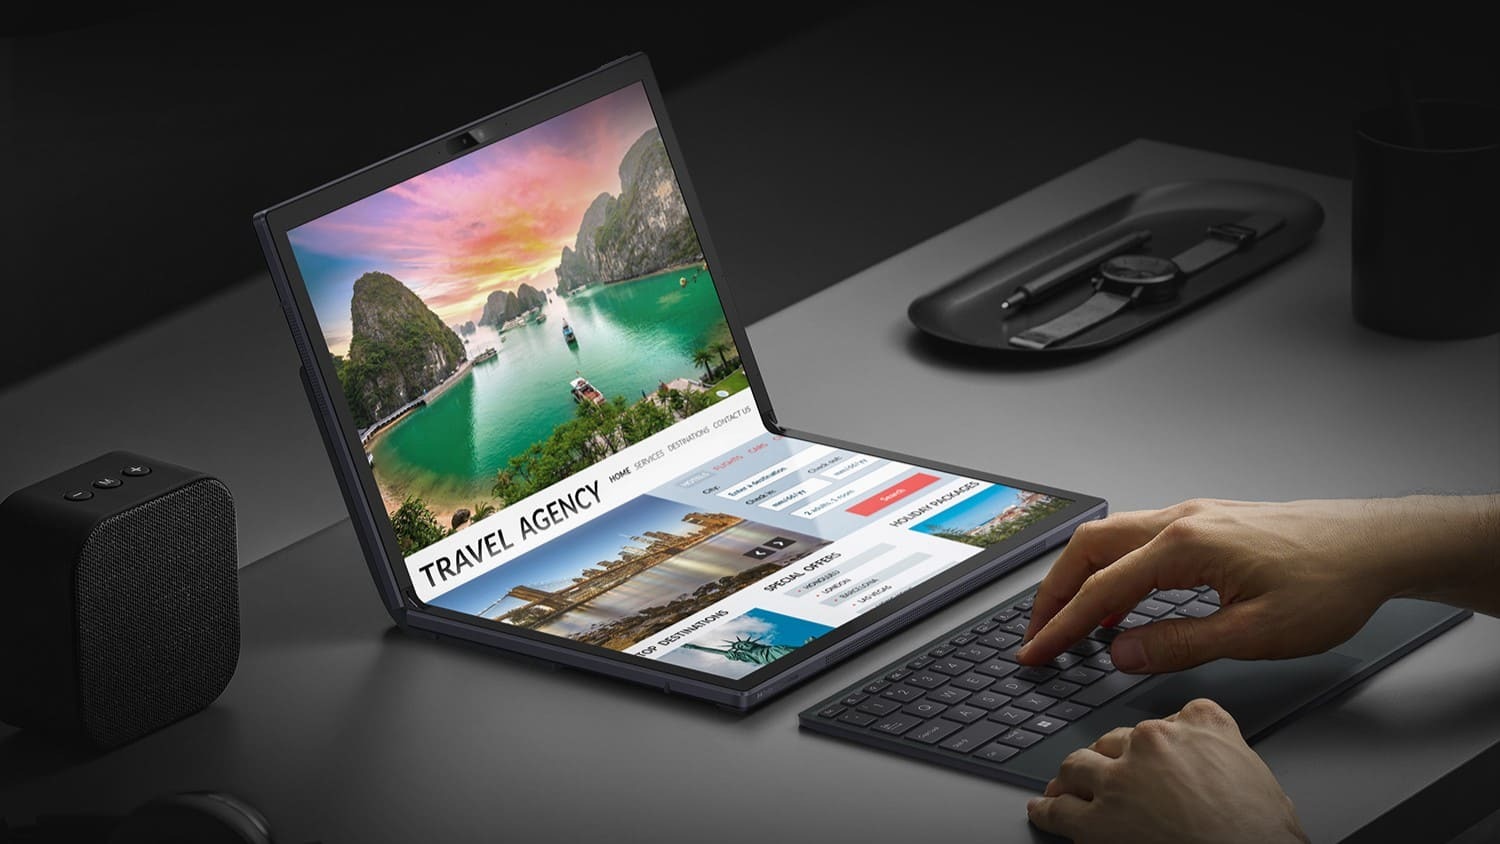 Samsung mulling over screen covers of future Mac laptops with foldable  display as Apple wants ultrathin glass - NotebookCheck.net News